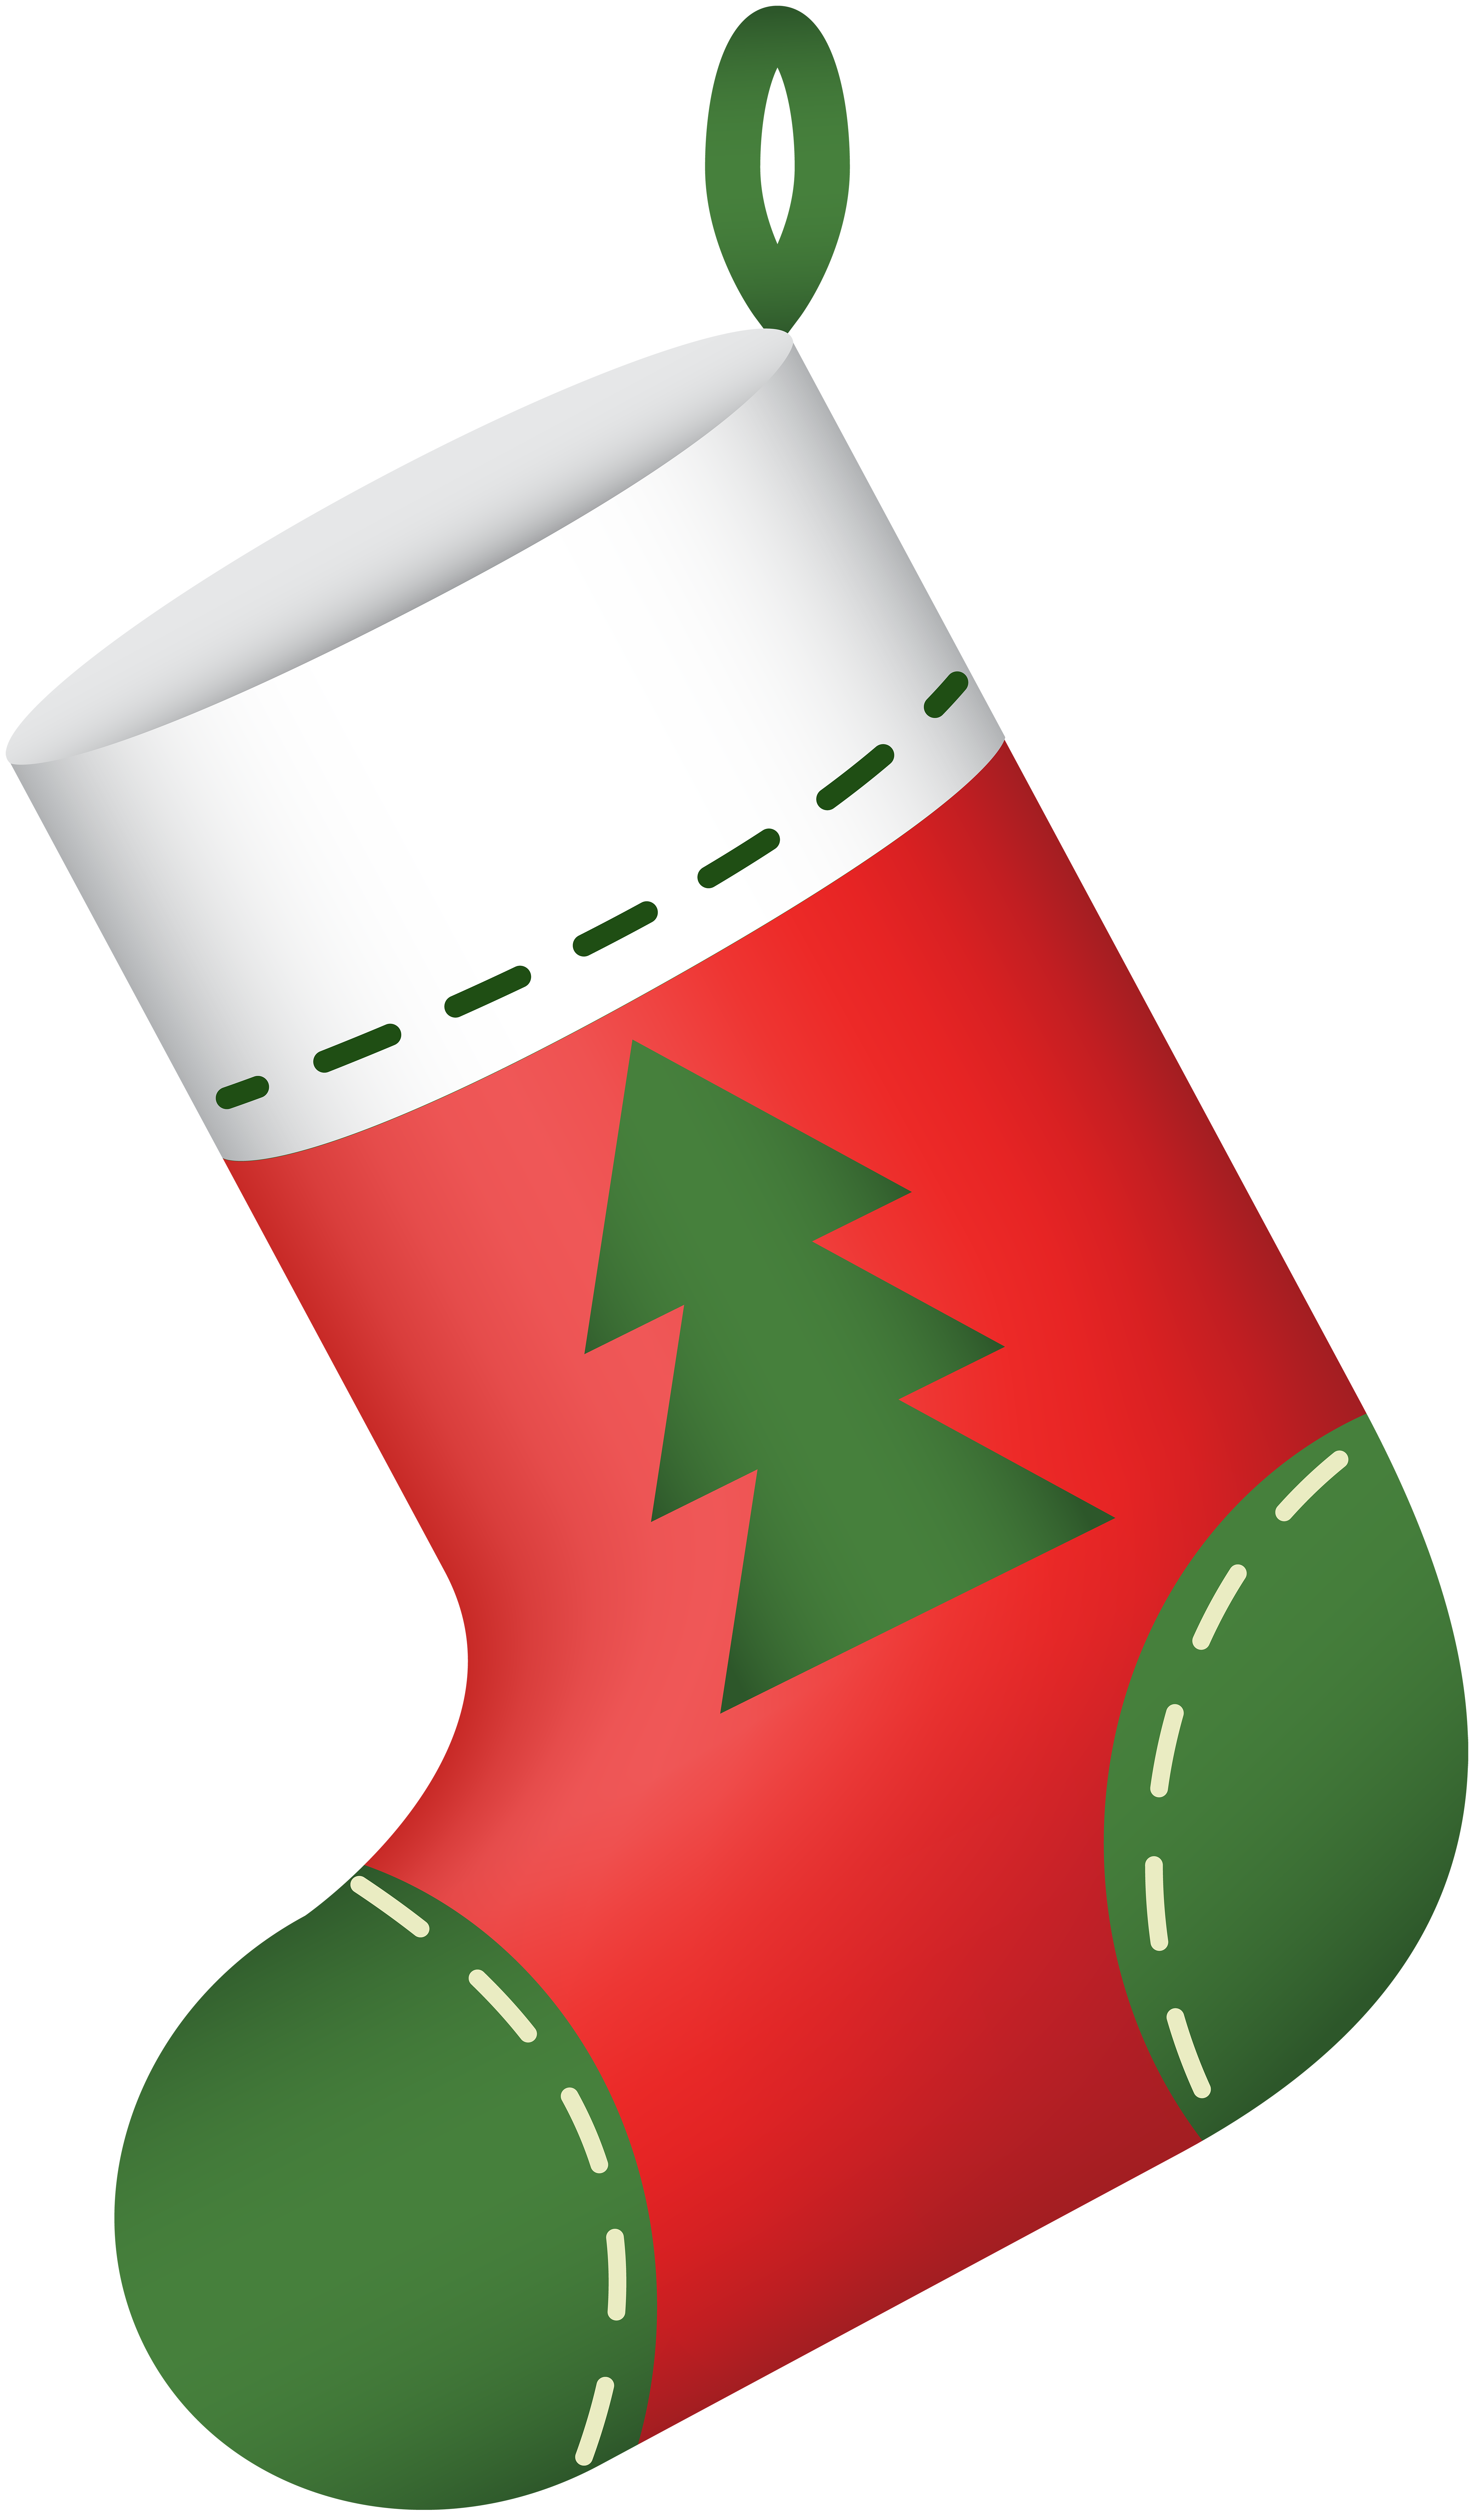 Free Christmas Stockings Clipart, Download Free Christmas Stockings